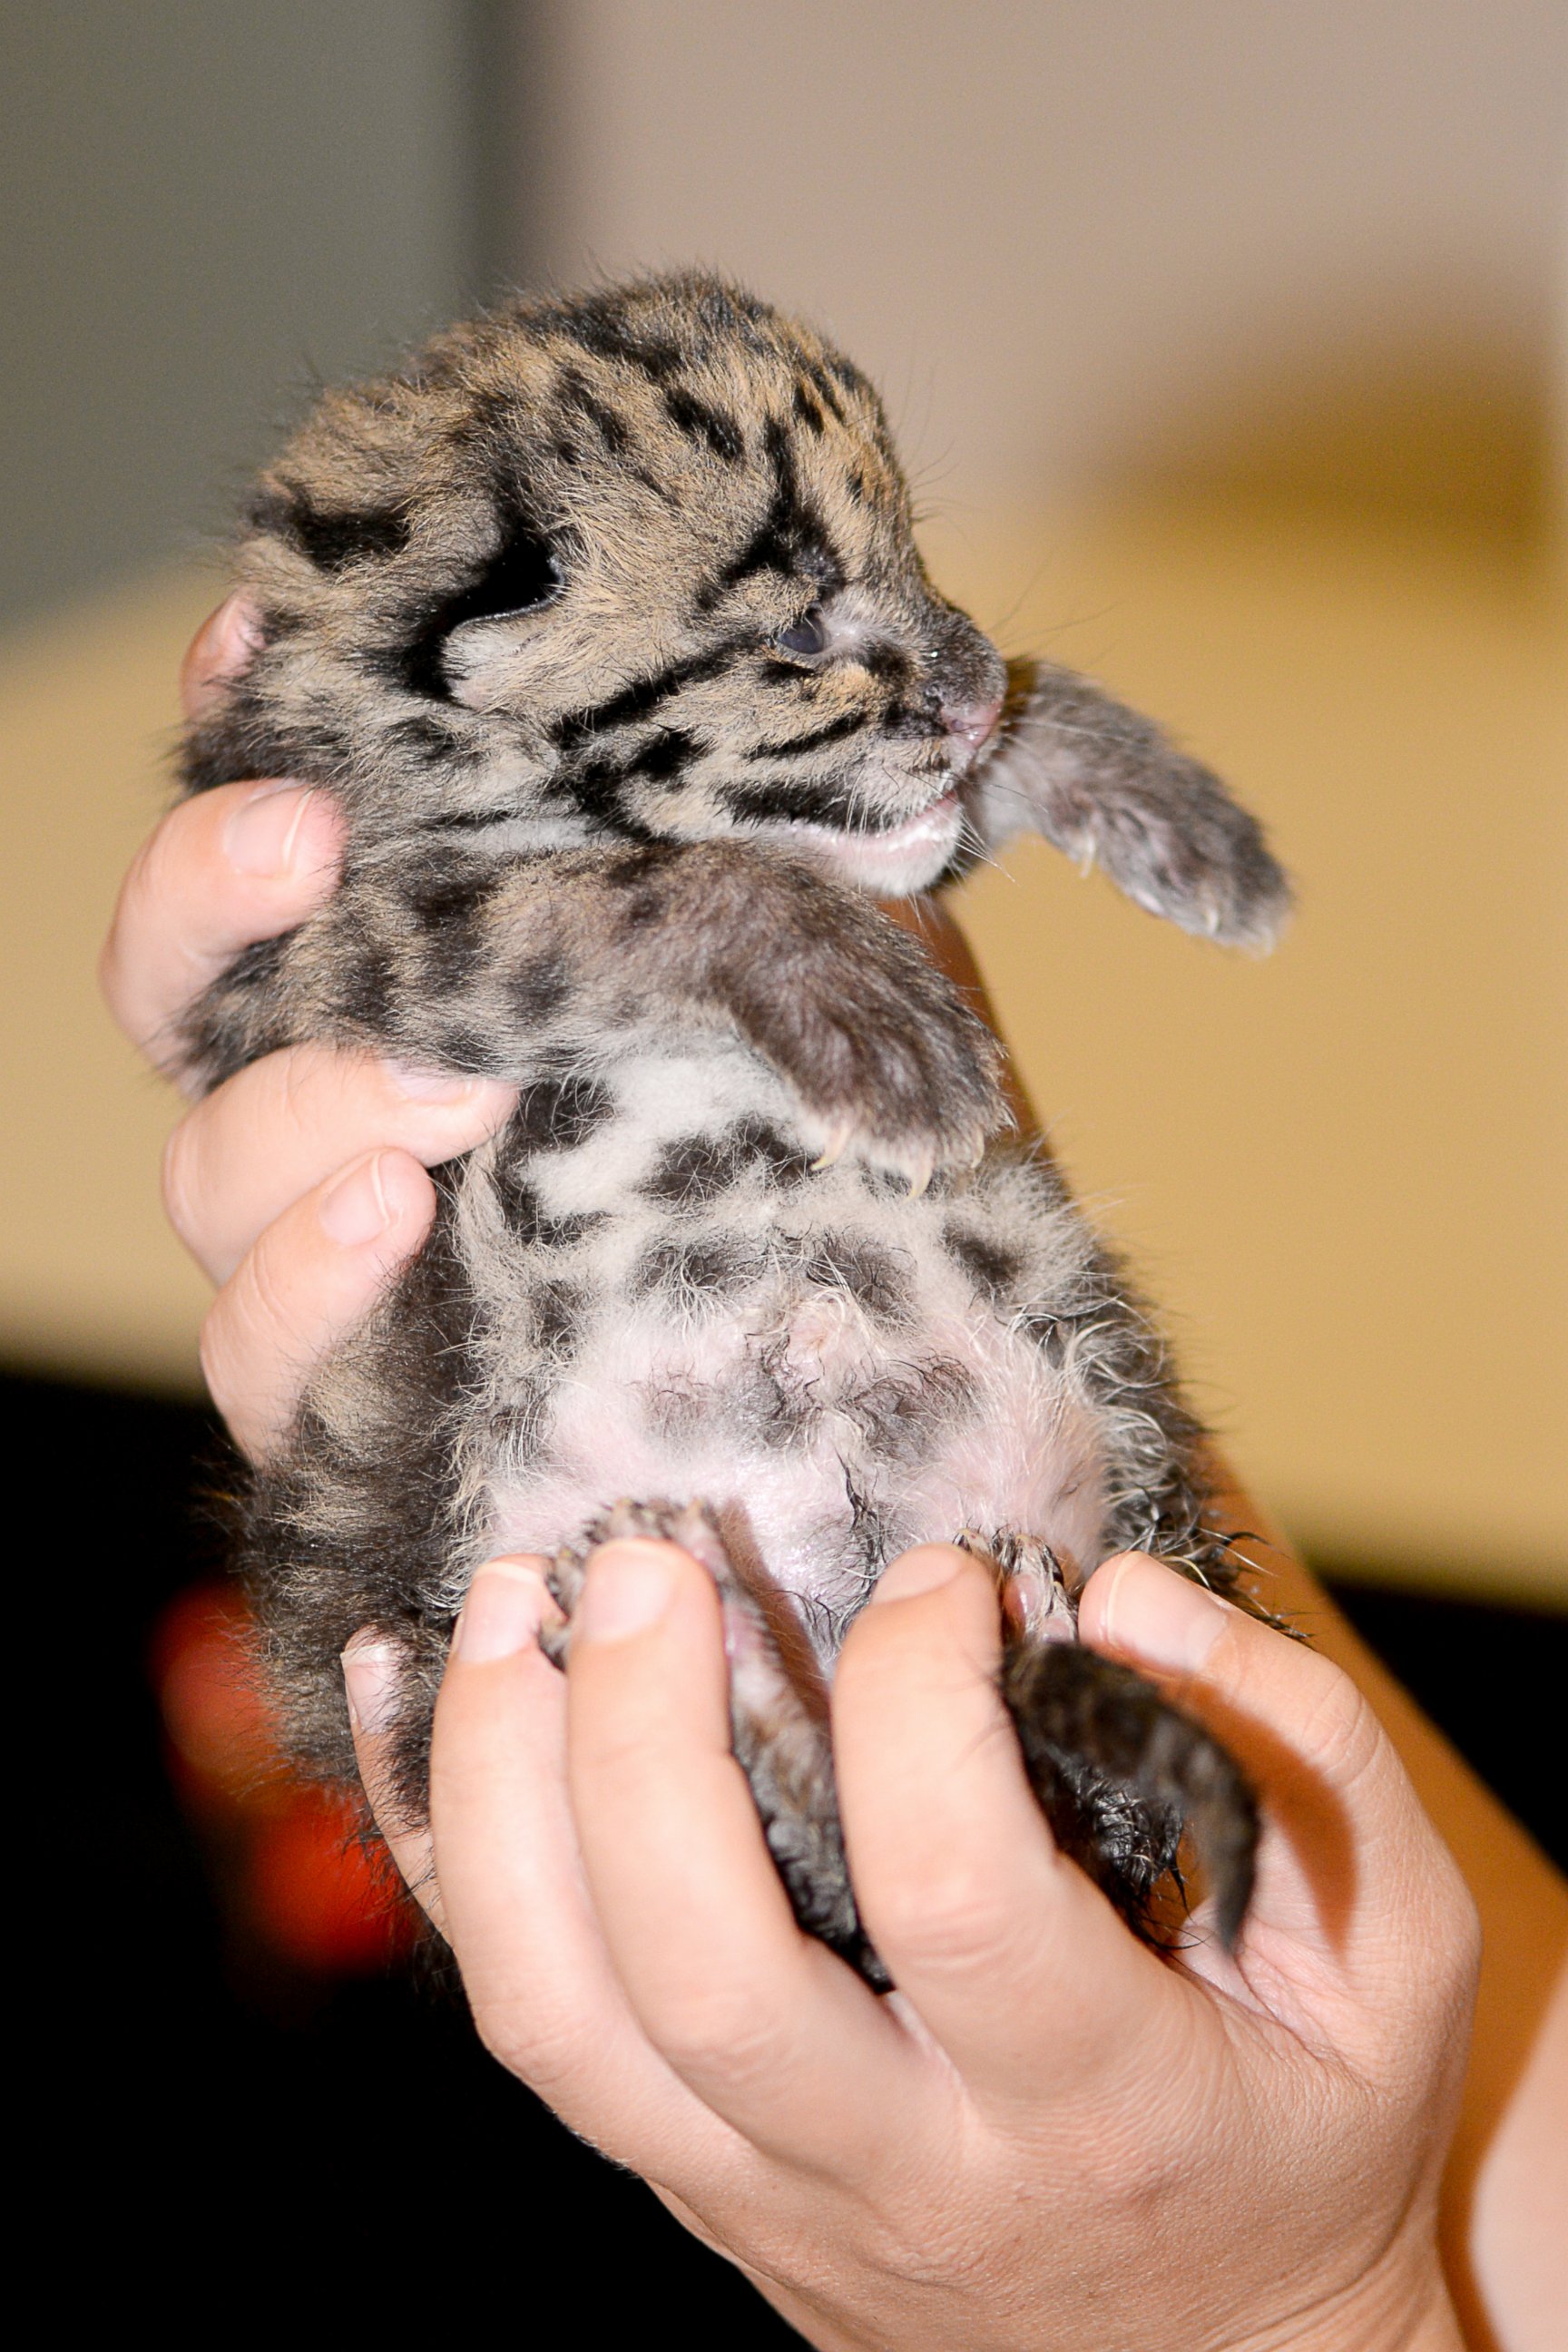 PHOTO: An endangered clouded leopard gave birth to a single male kitten on March 7, 2015, at Tampa's Lowry Park Zoo. 